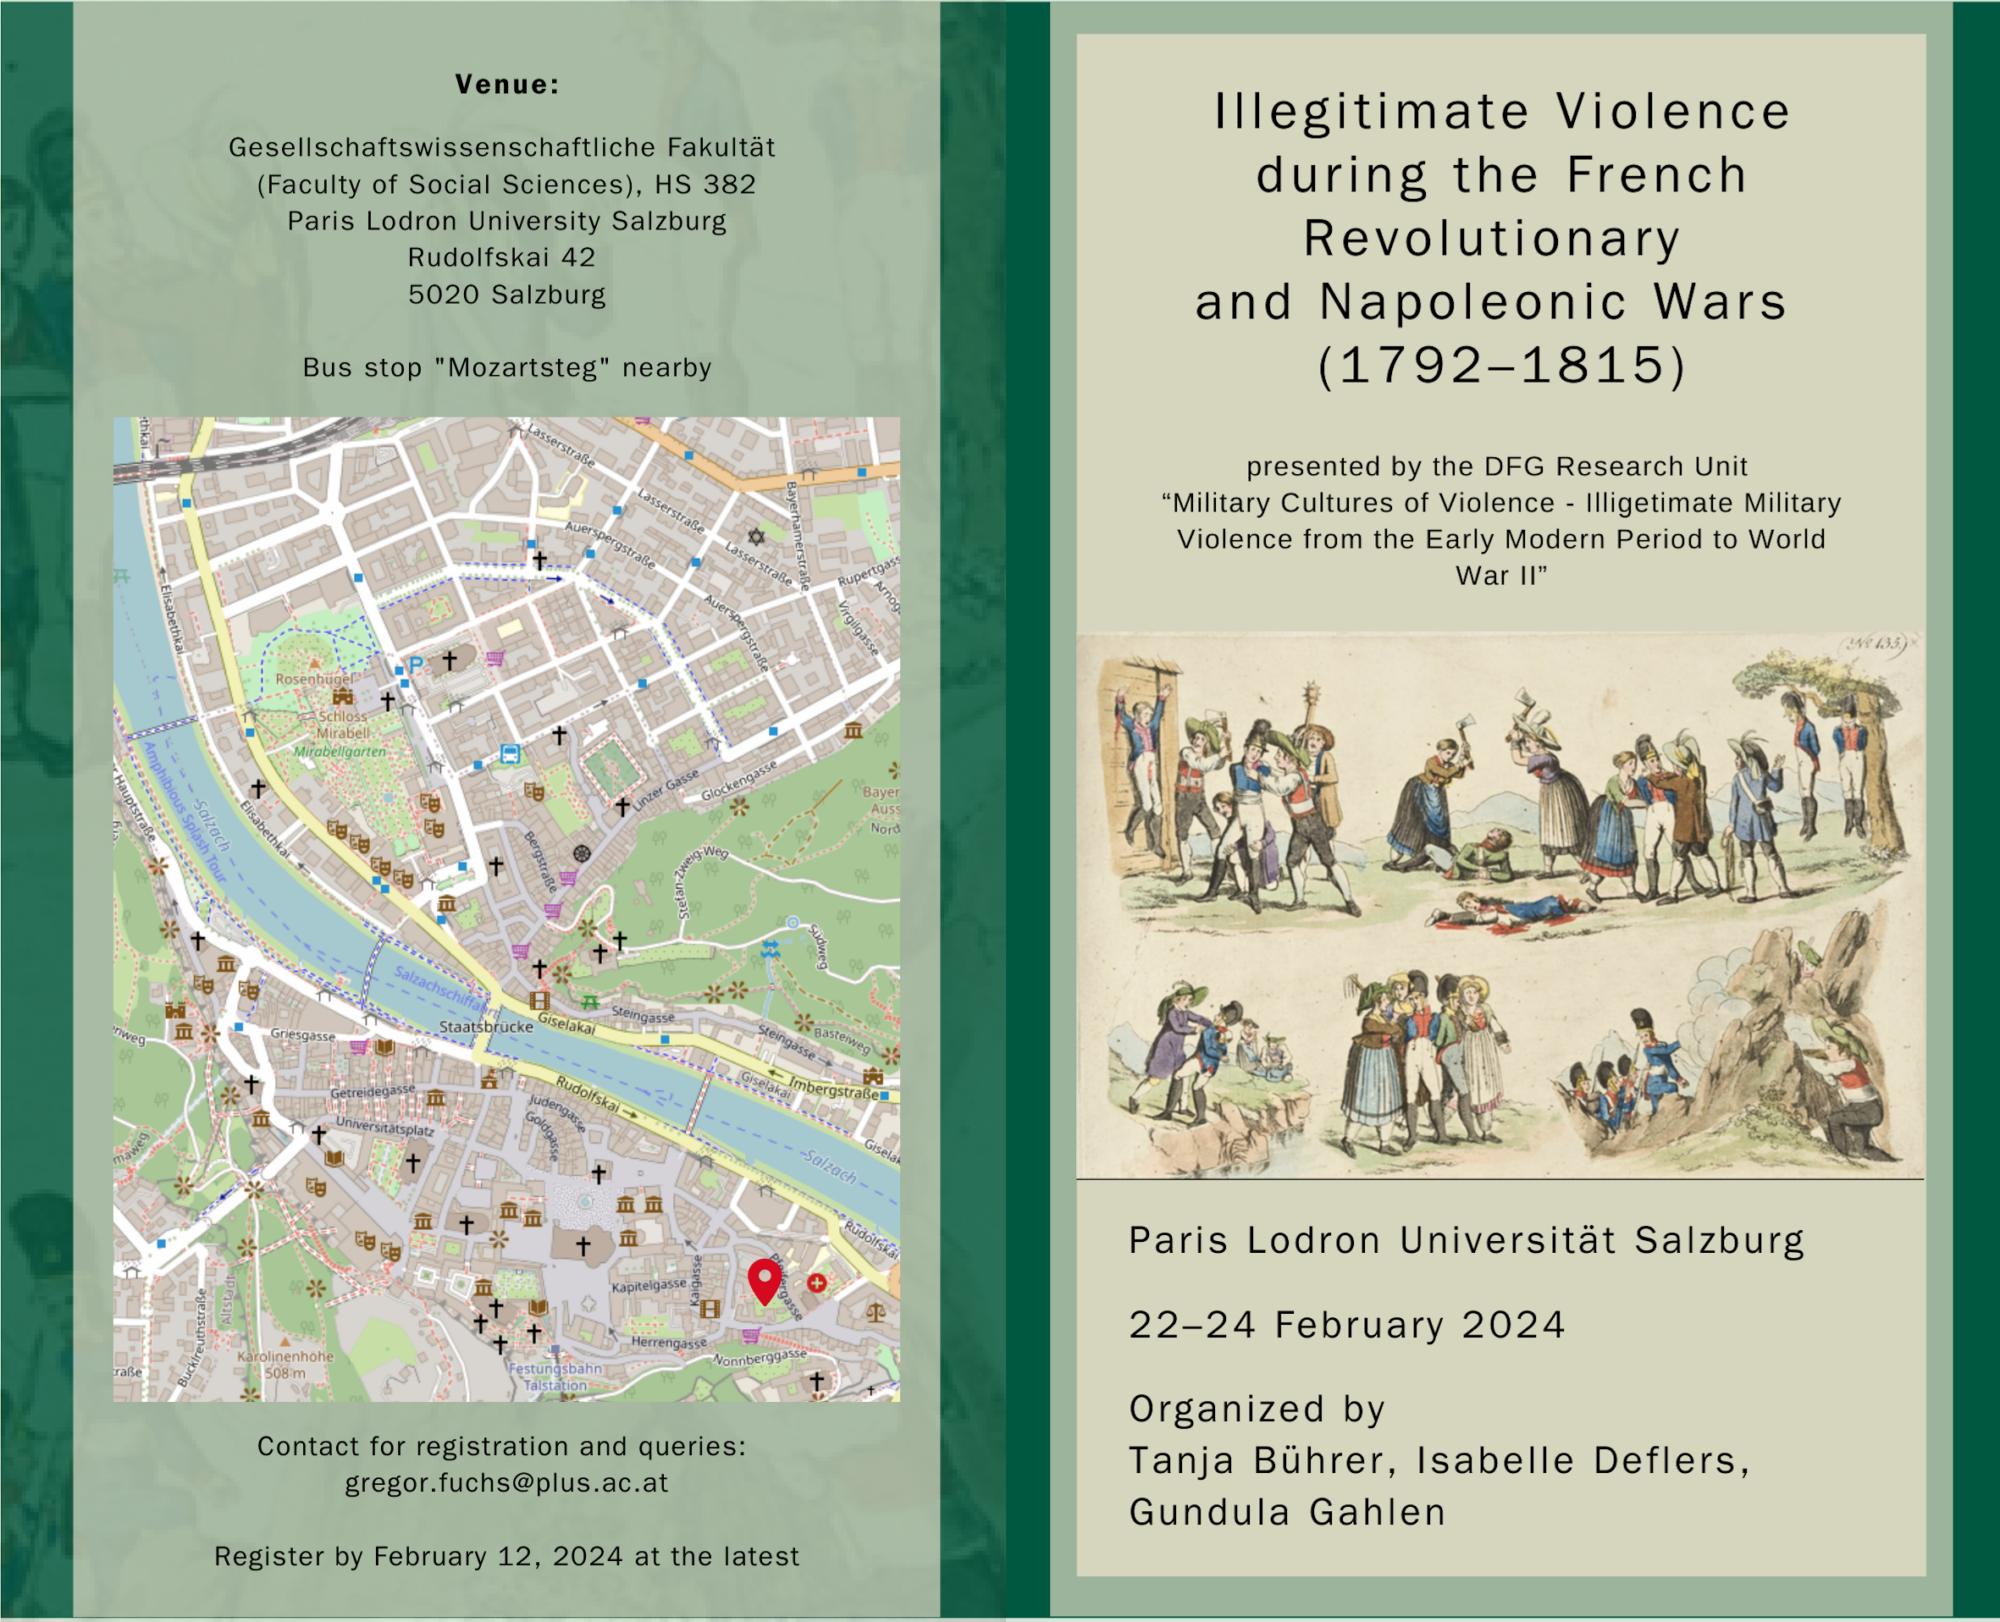 Tagung: Illegitimate Violence during the French Revolutionary and Napoleonic Wars (1792-1815)